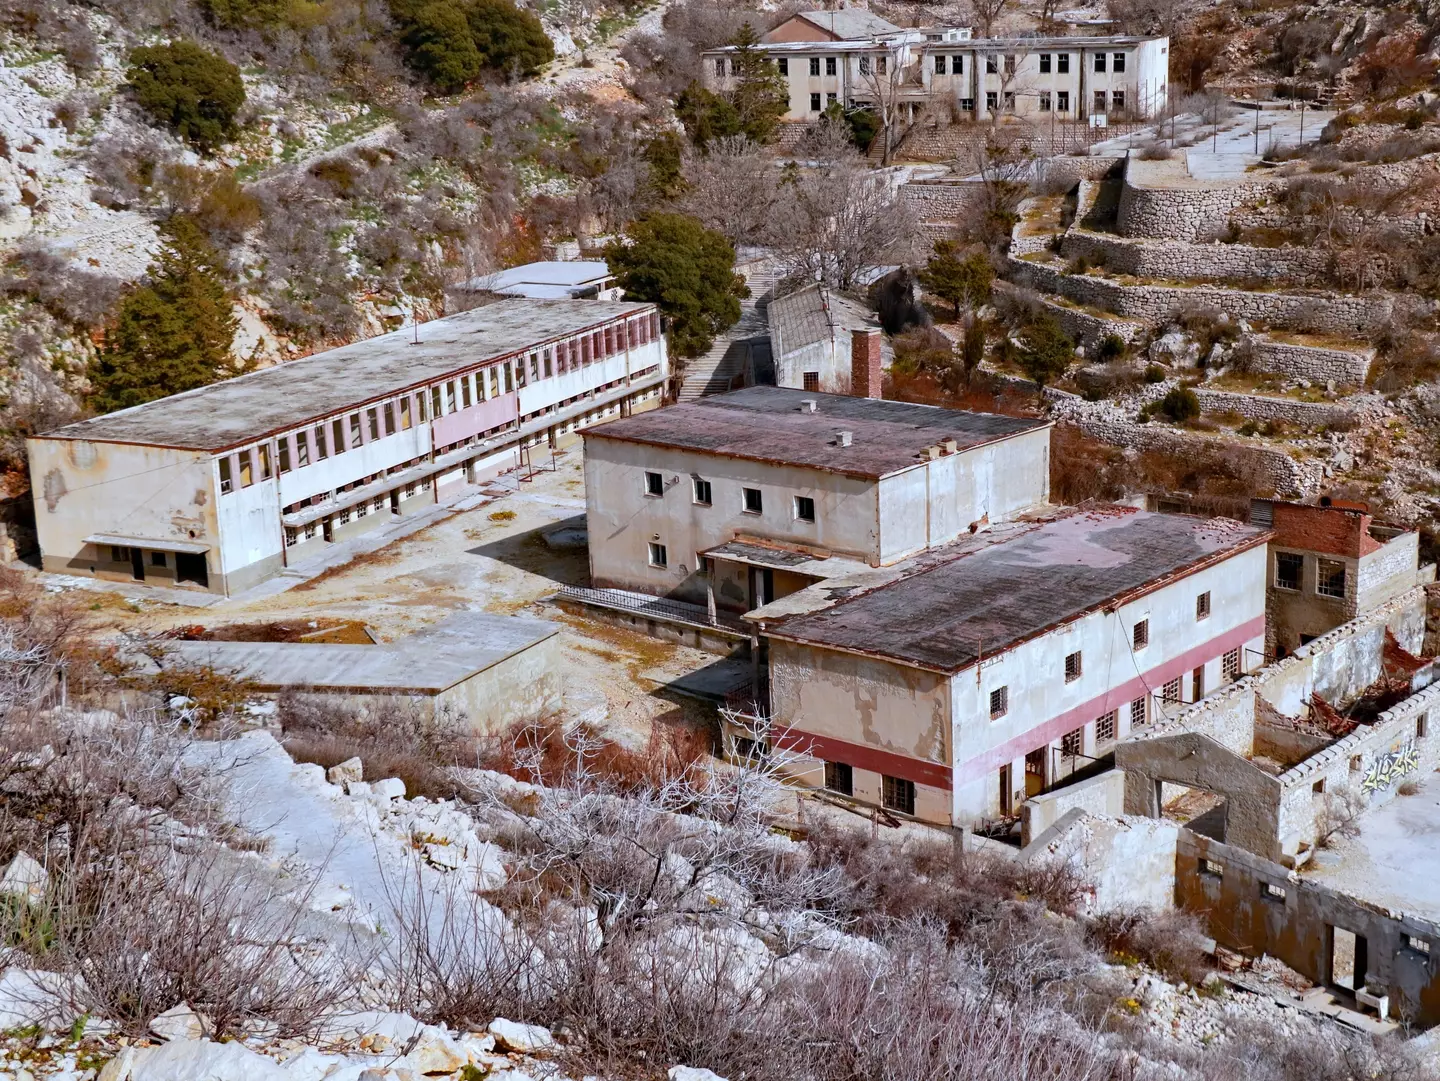 Goli Otok was one of the most terrifying prisons in the region.